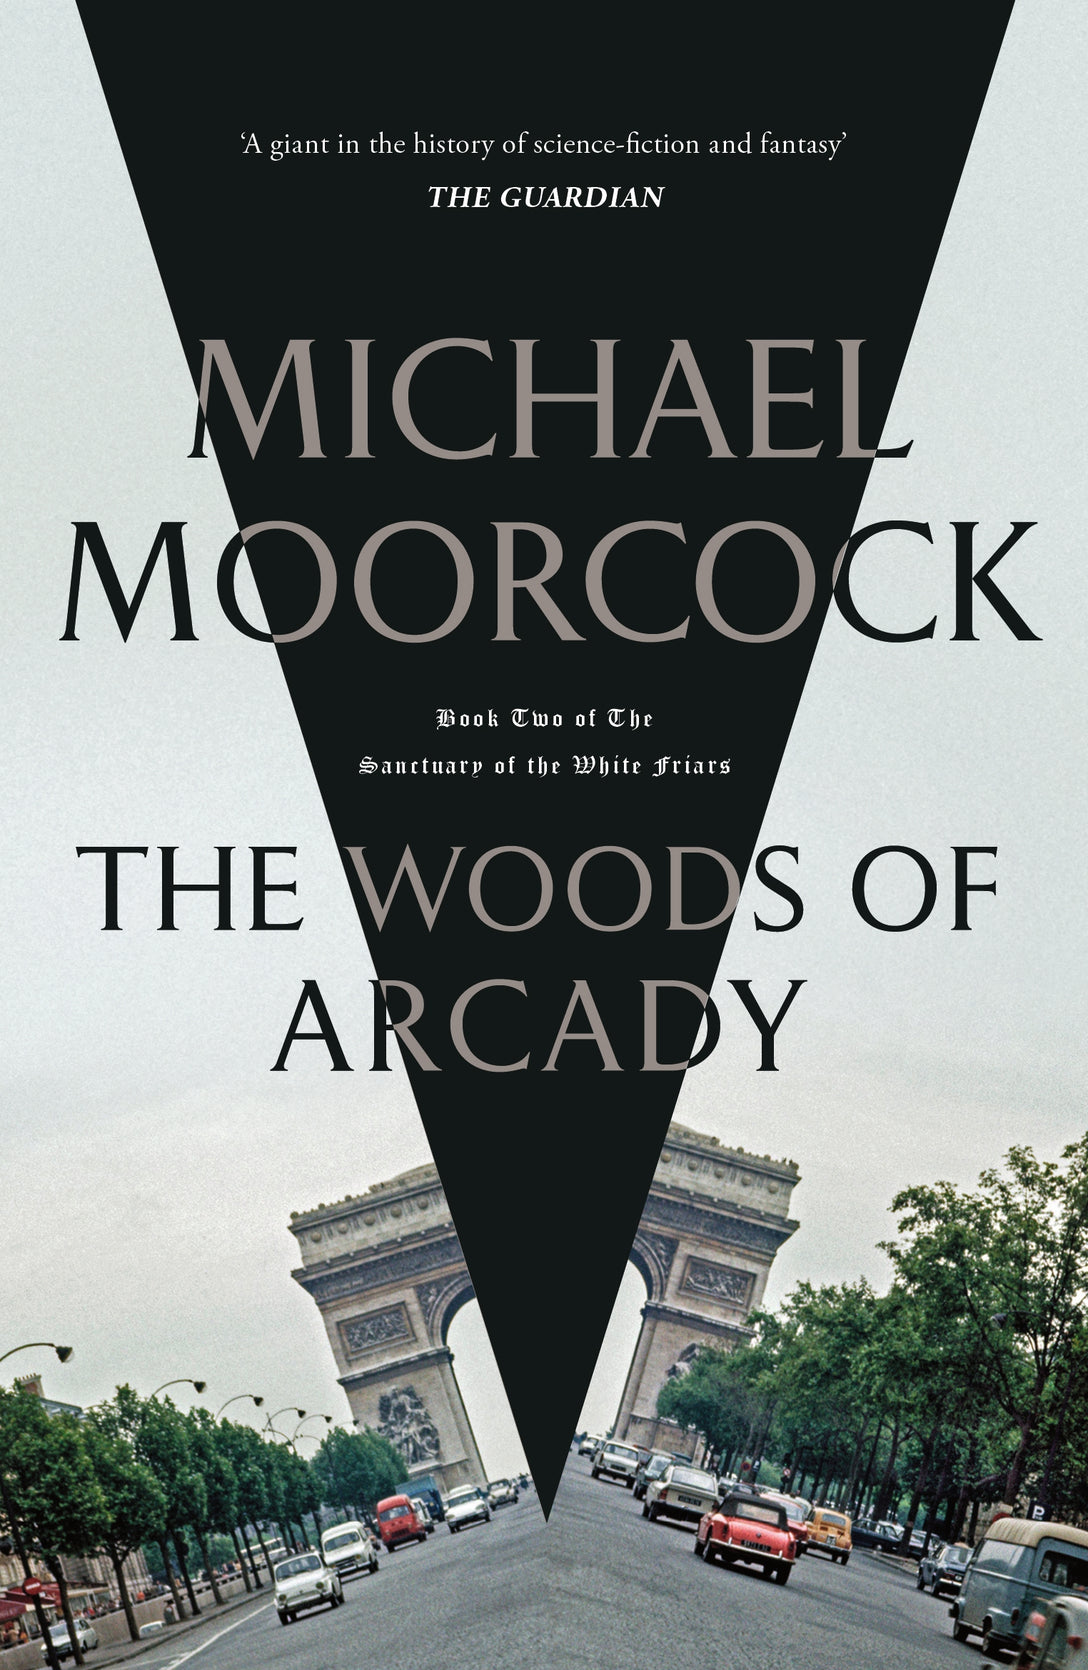 The Woods of Arcady by Michael Moorcock